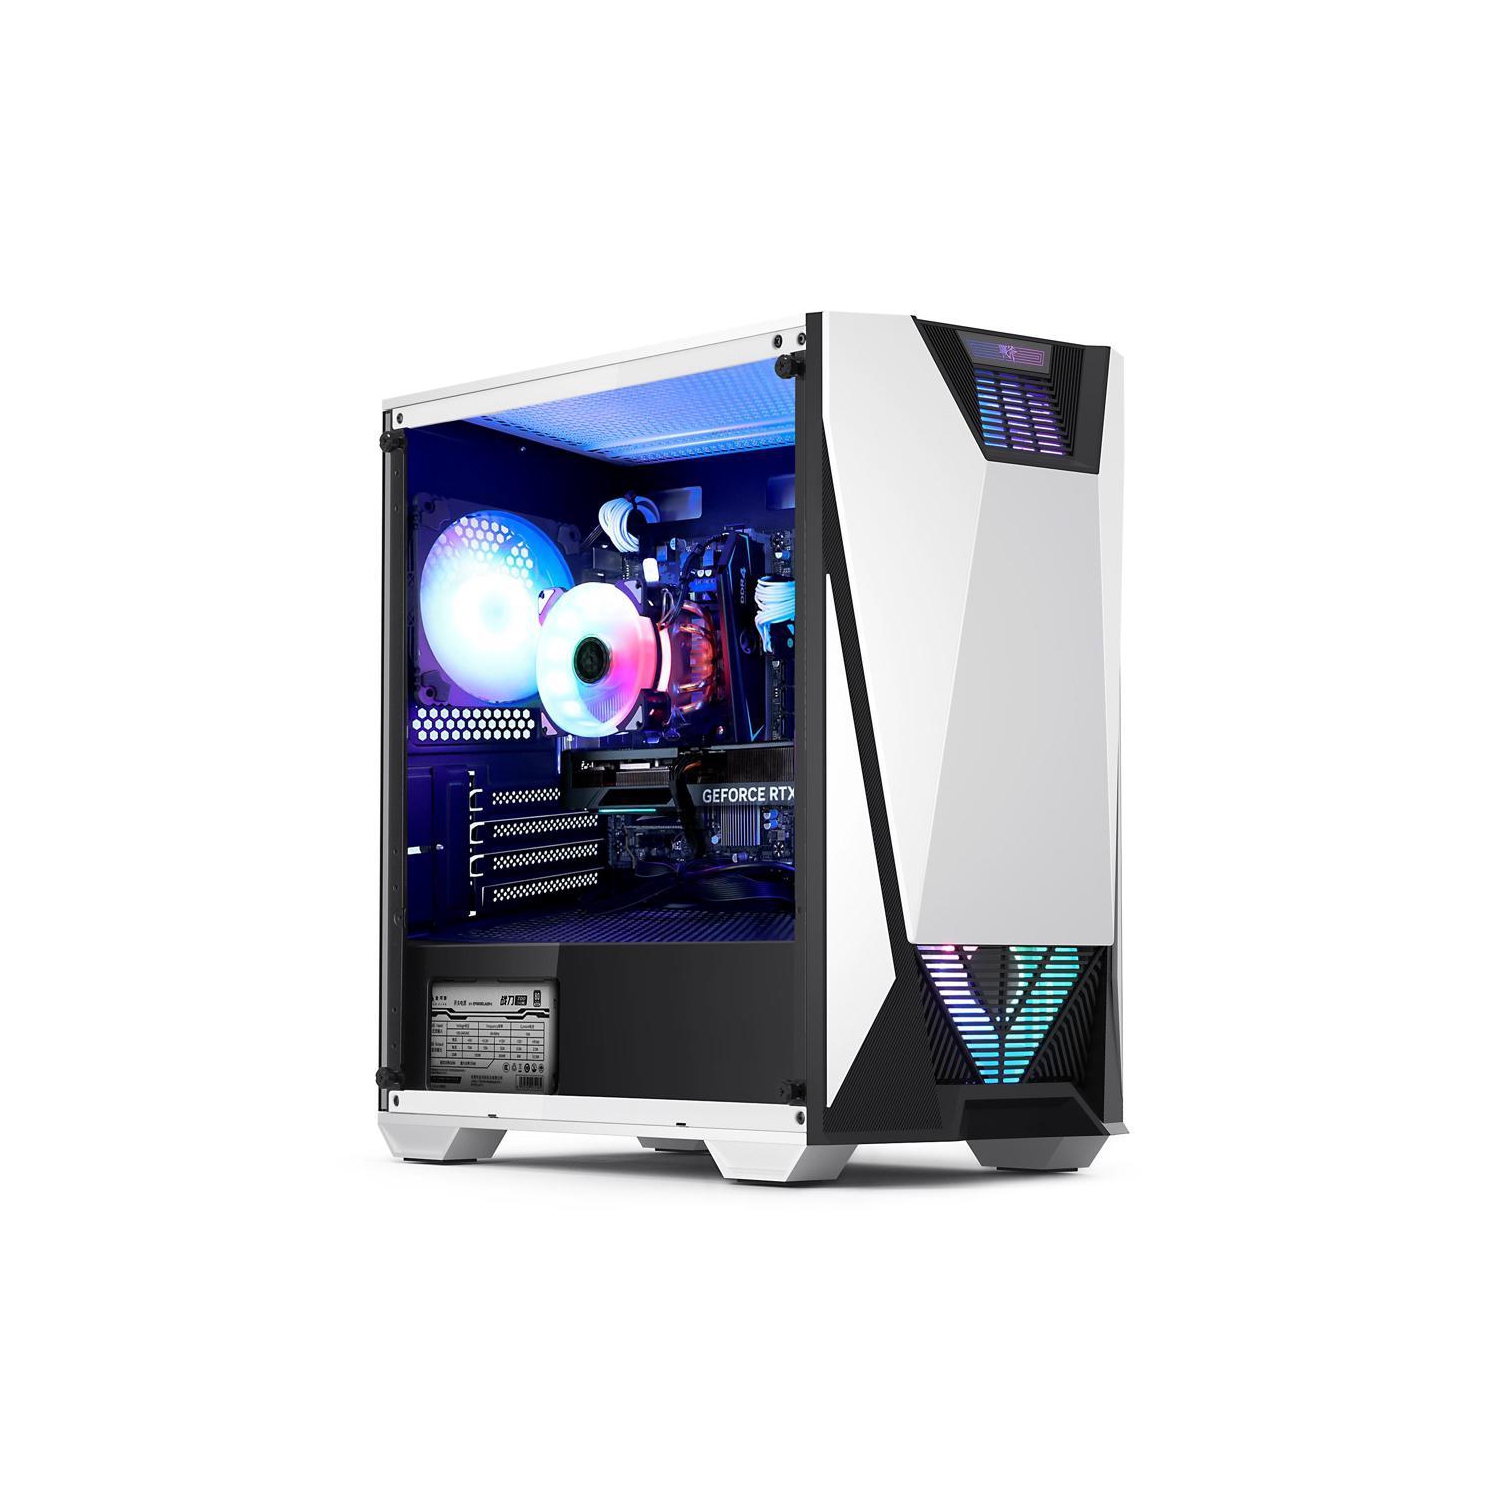 Hoengager Battleaxe Gaming - Intel Core i5-12400F 6-Core 2.5 GHz-NVIDIA GeForce RTX 3060 - 32GB DDR4 3200MHz - 1TB +500GB M.2 NVMe SSD- WIFI -RGB Fans - Windows 11 Pro Computer